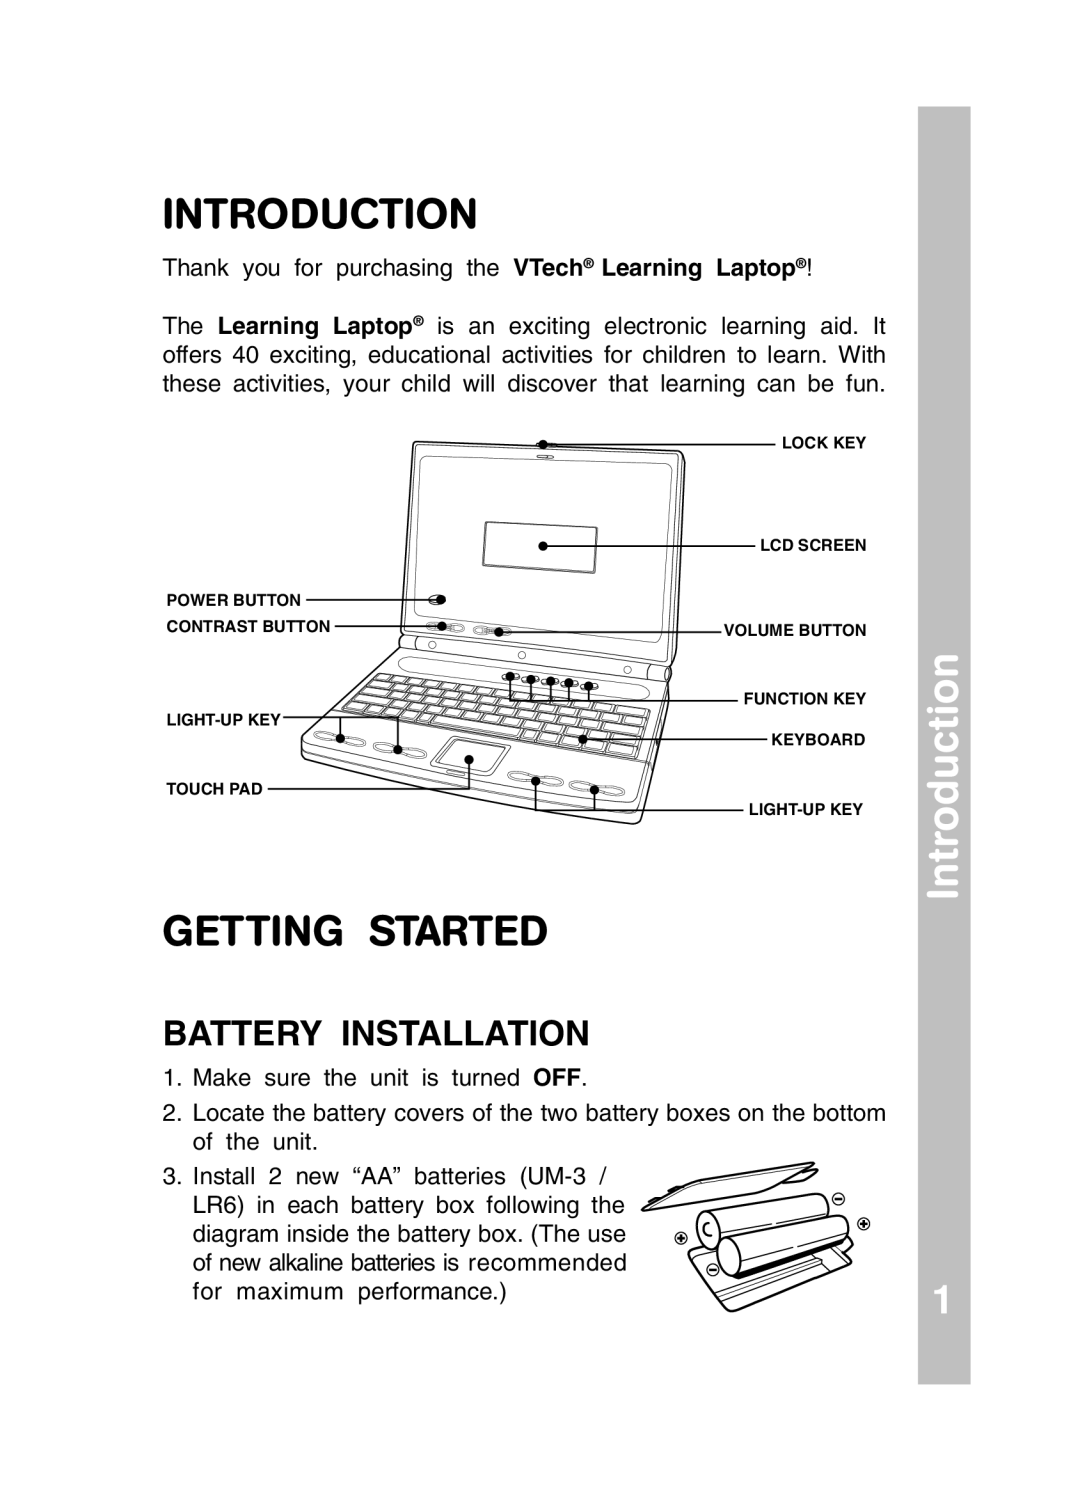 VTech 91-01256-043 user manual Introduction, Getting Started, Battery Installation 